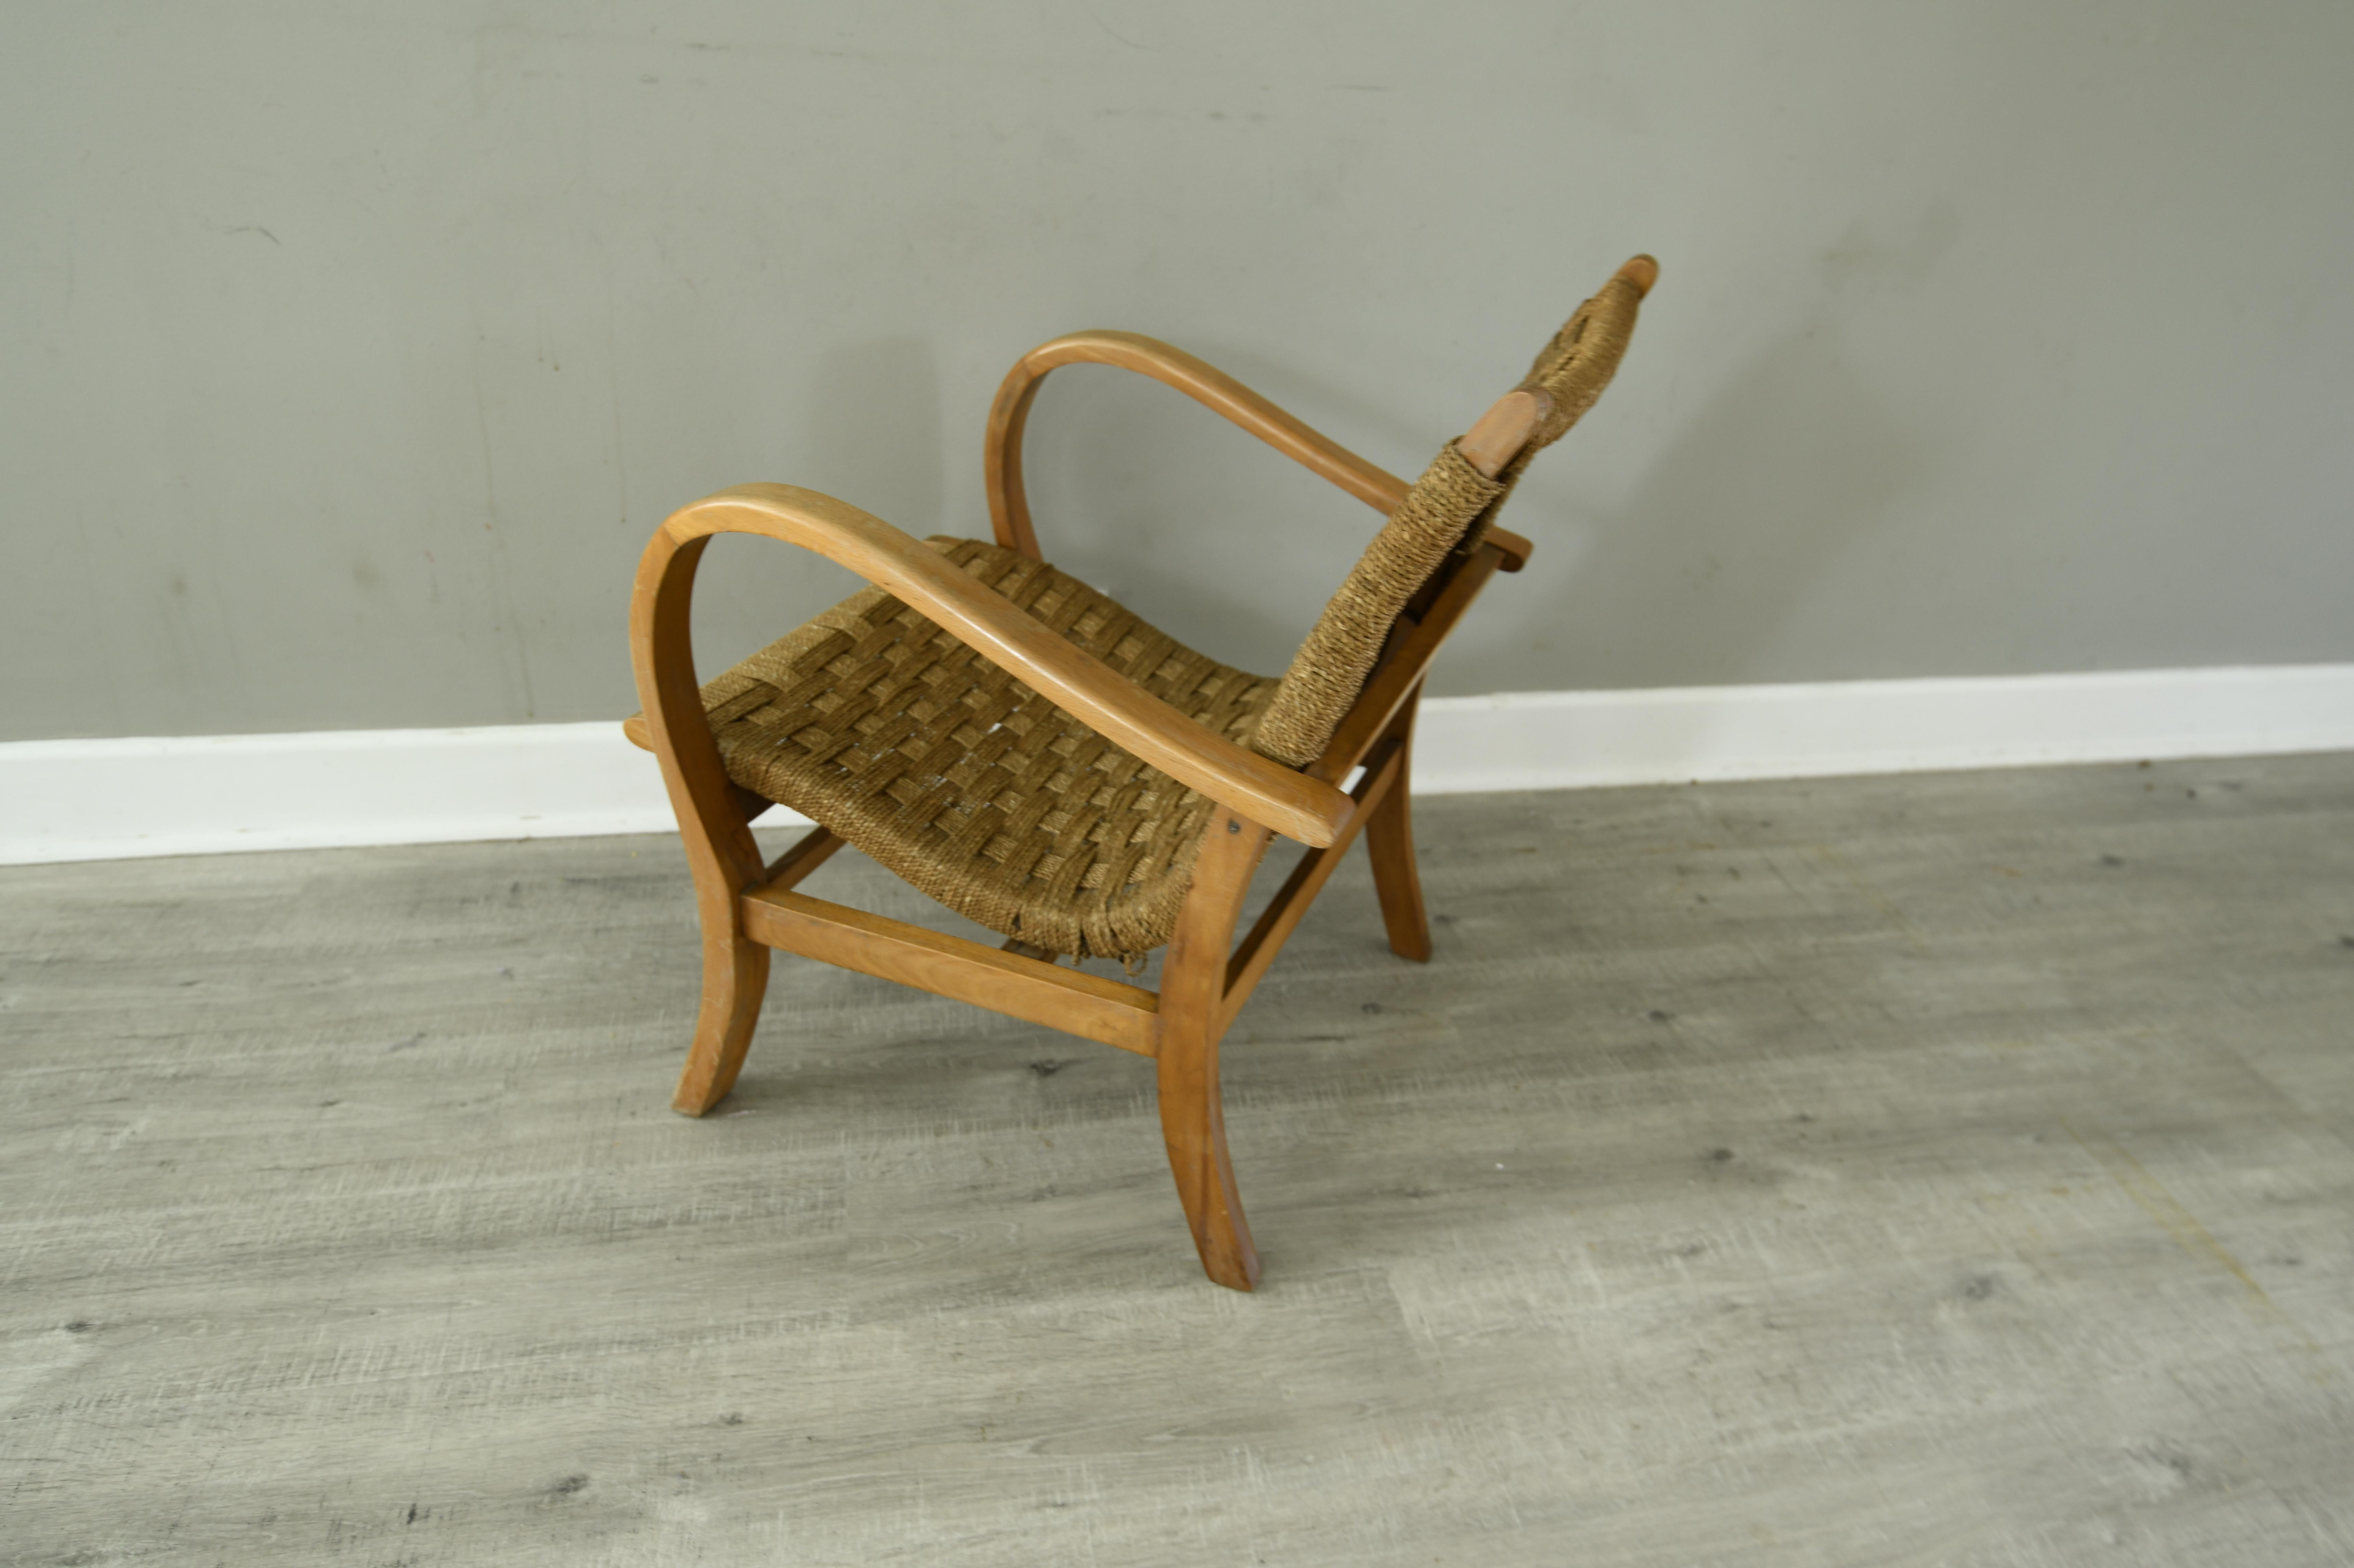 This Bauhaus easy armchair was designed by Erich Dieckmann in the 1920-1930s and made in Germany. The structure is in beech and the backs and seat in braided rope. The restored chair remains very comfortable.